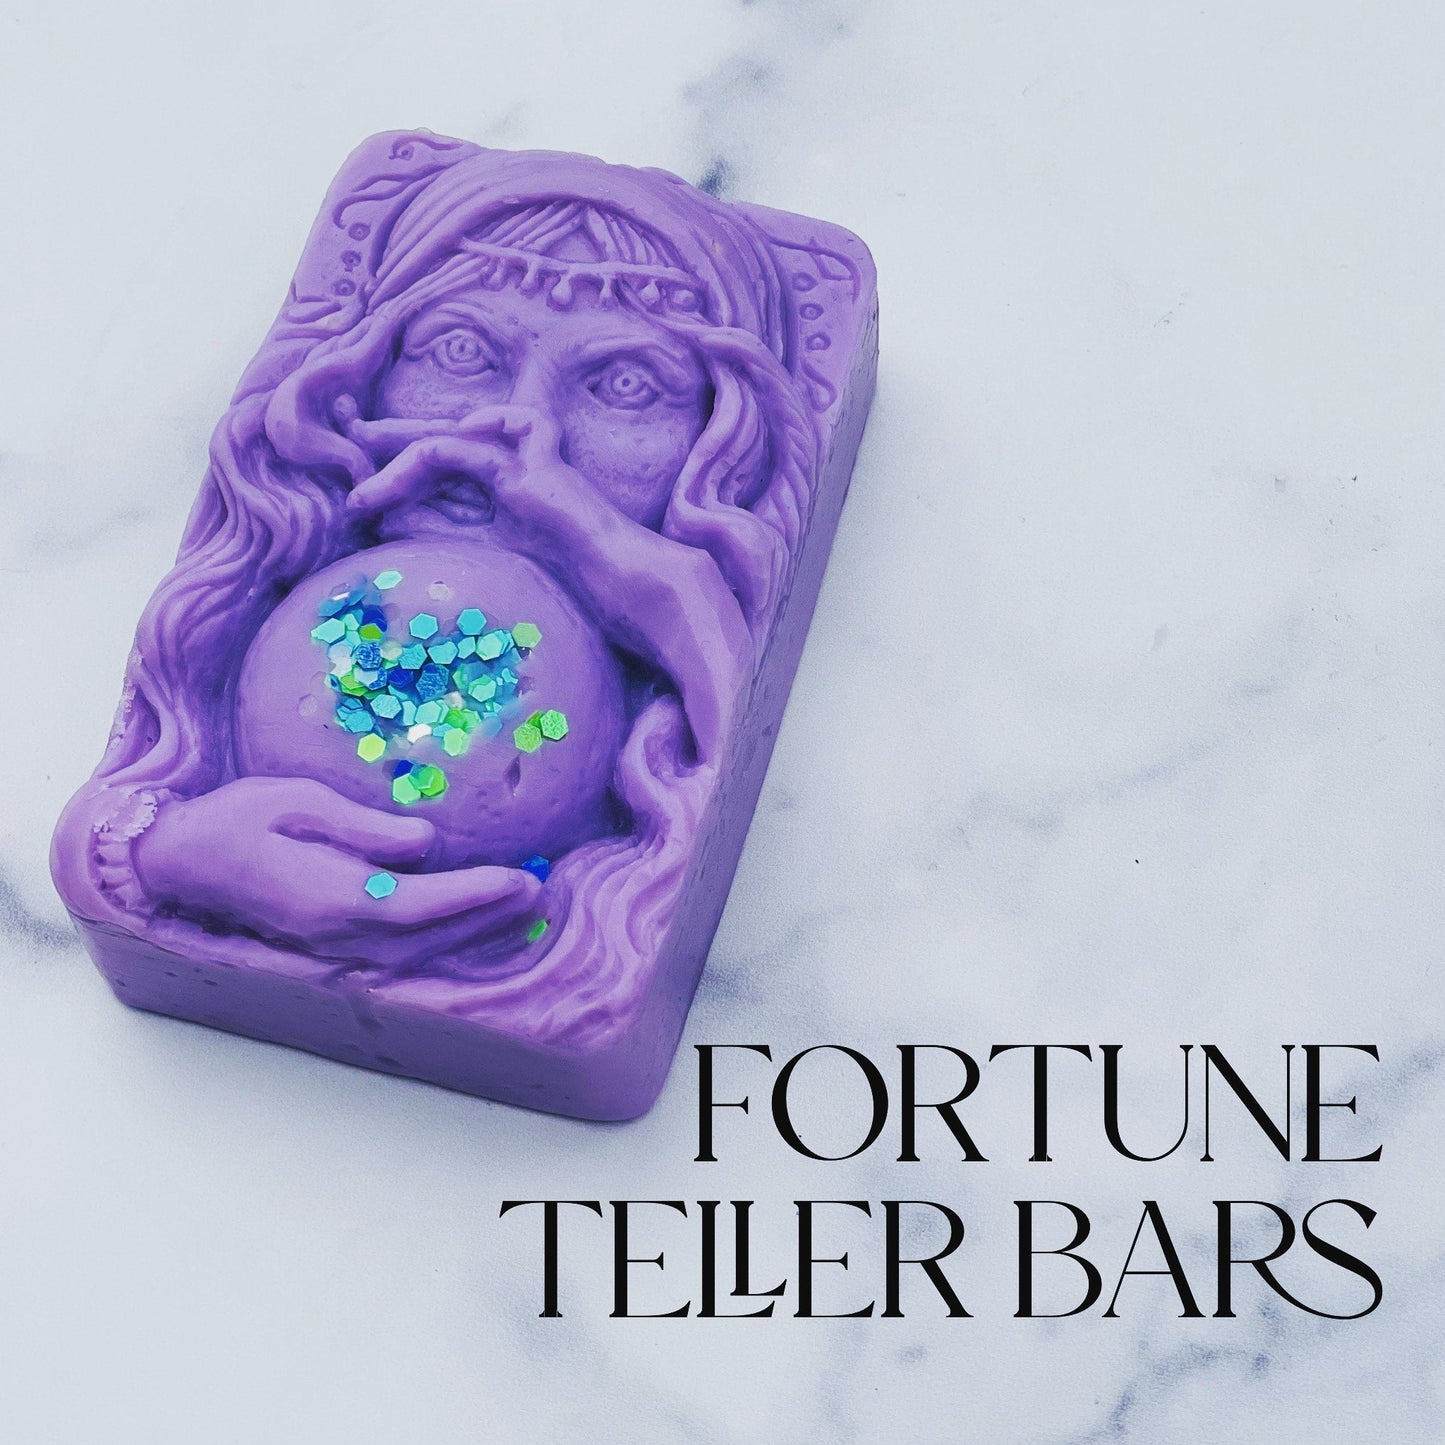 Let's Go to the Mall (Fortune Teller Bar)